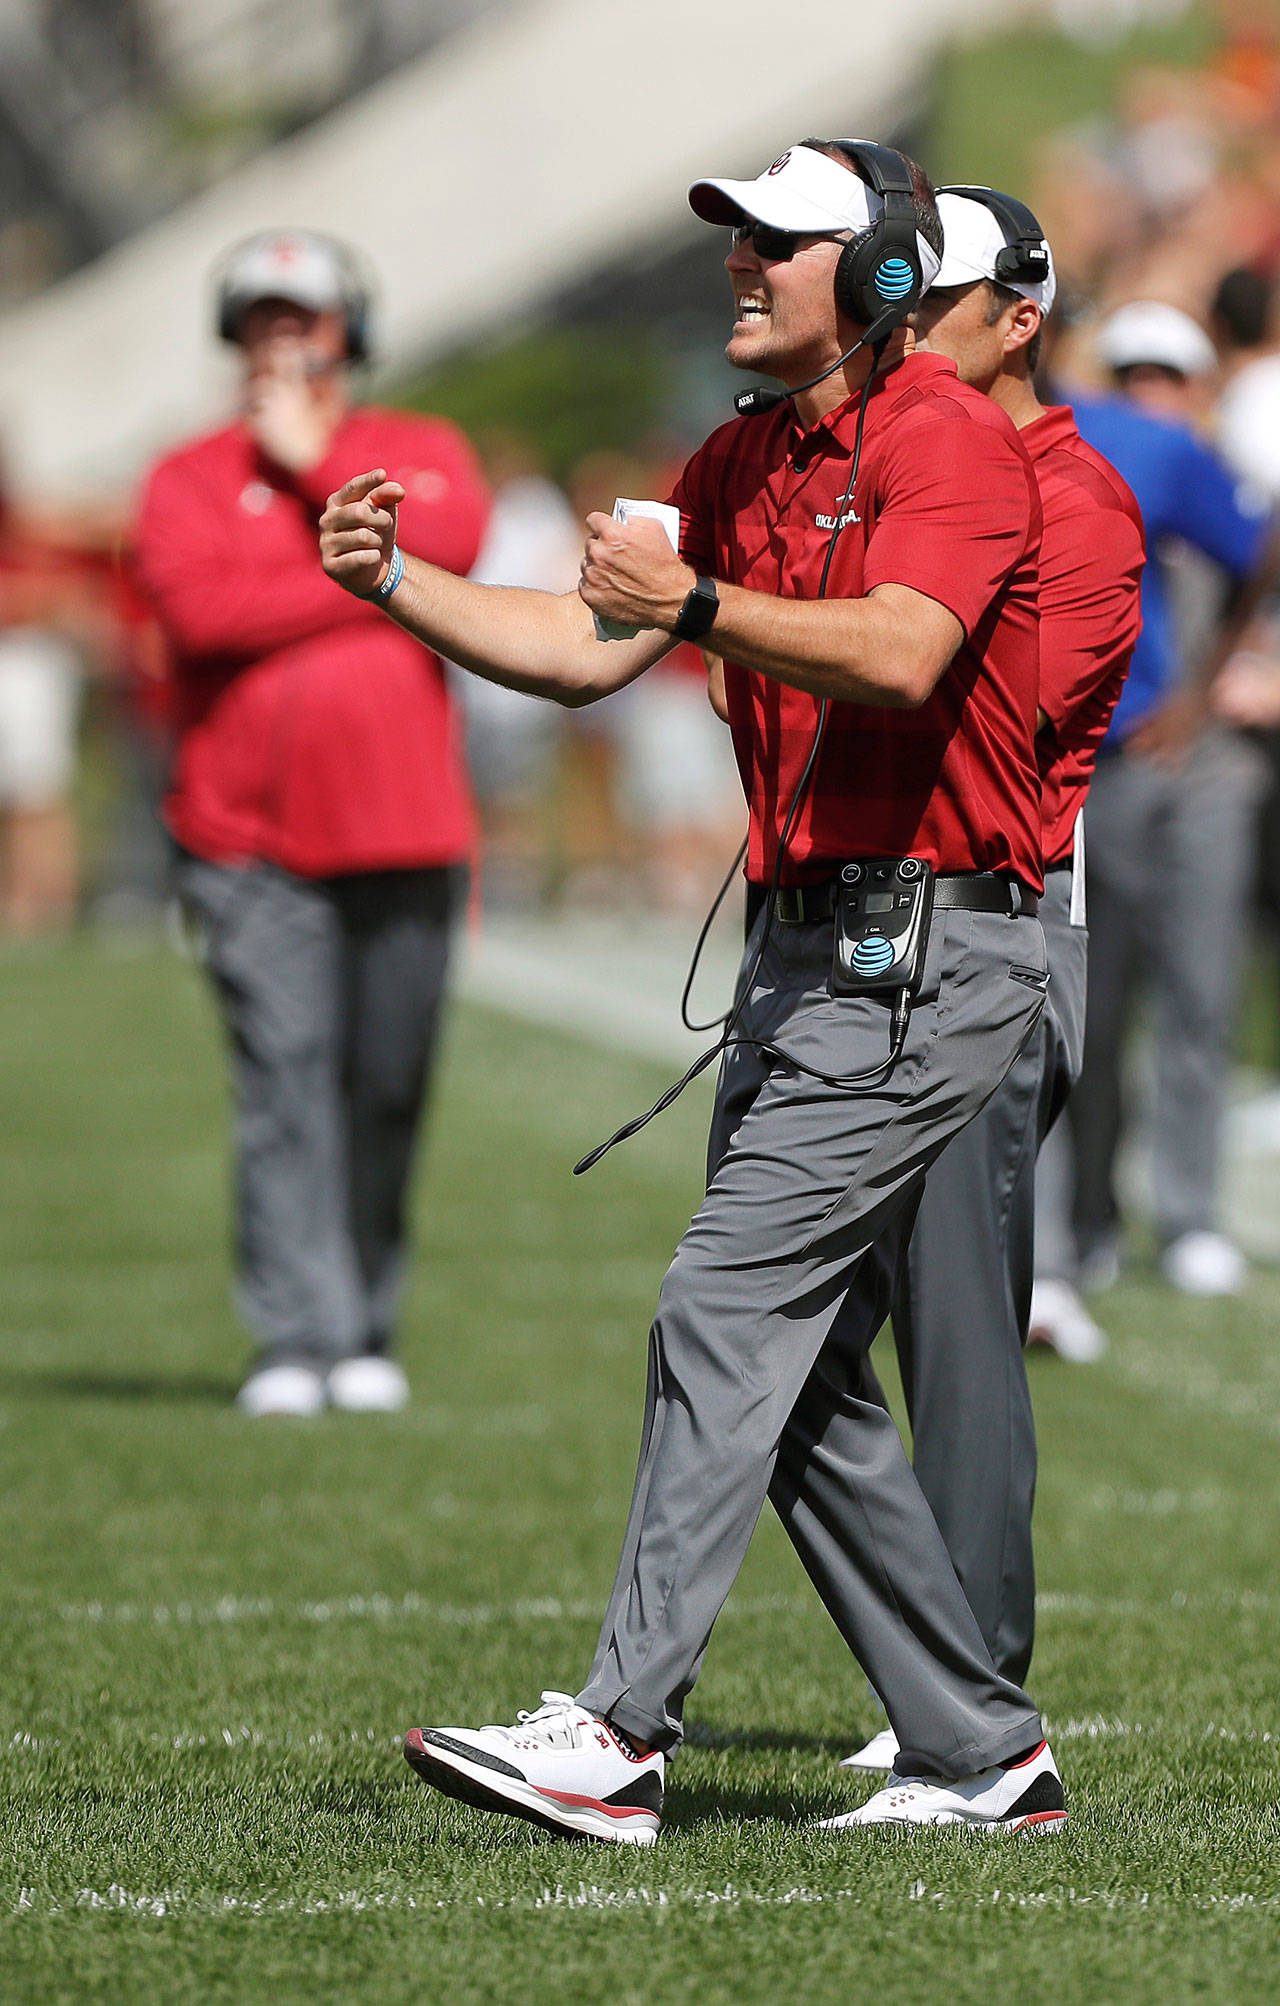 Oklahoma head coach Lincoln Riley reacts during the first half of a Sept. 15 game in Ames, Iowa. Riley held a variety of positions on Washington State coach Mike Leach’s staff at Texas Tech between 2003-09. (AP Photo/Matthew Putney)